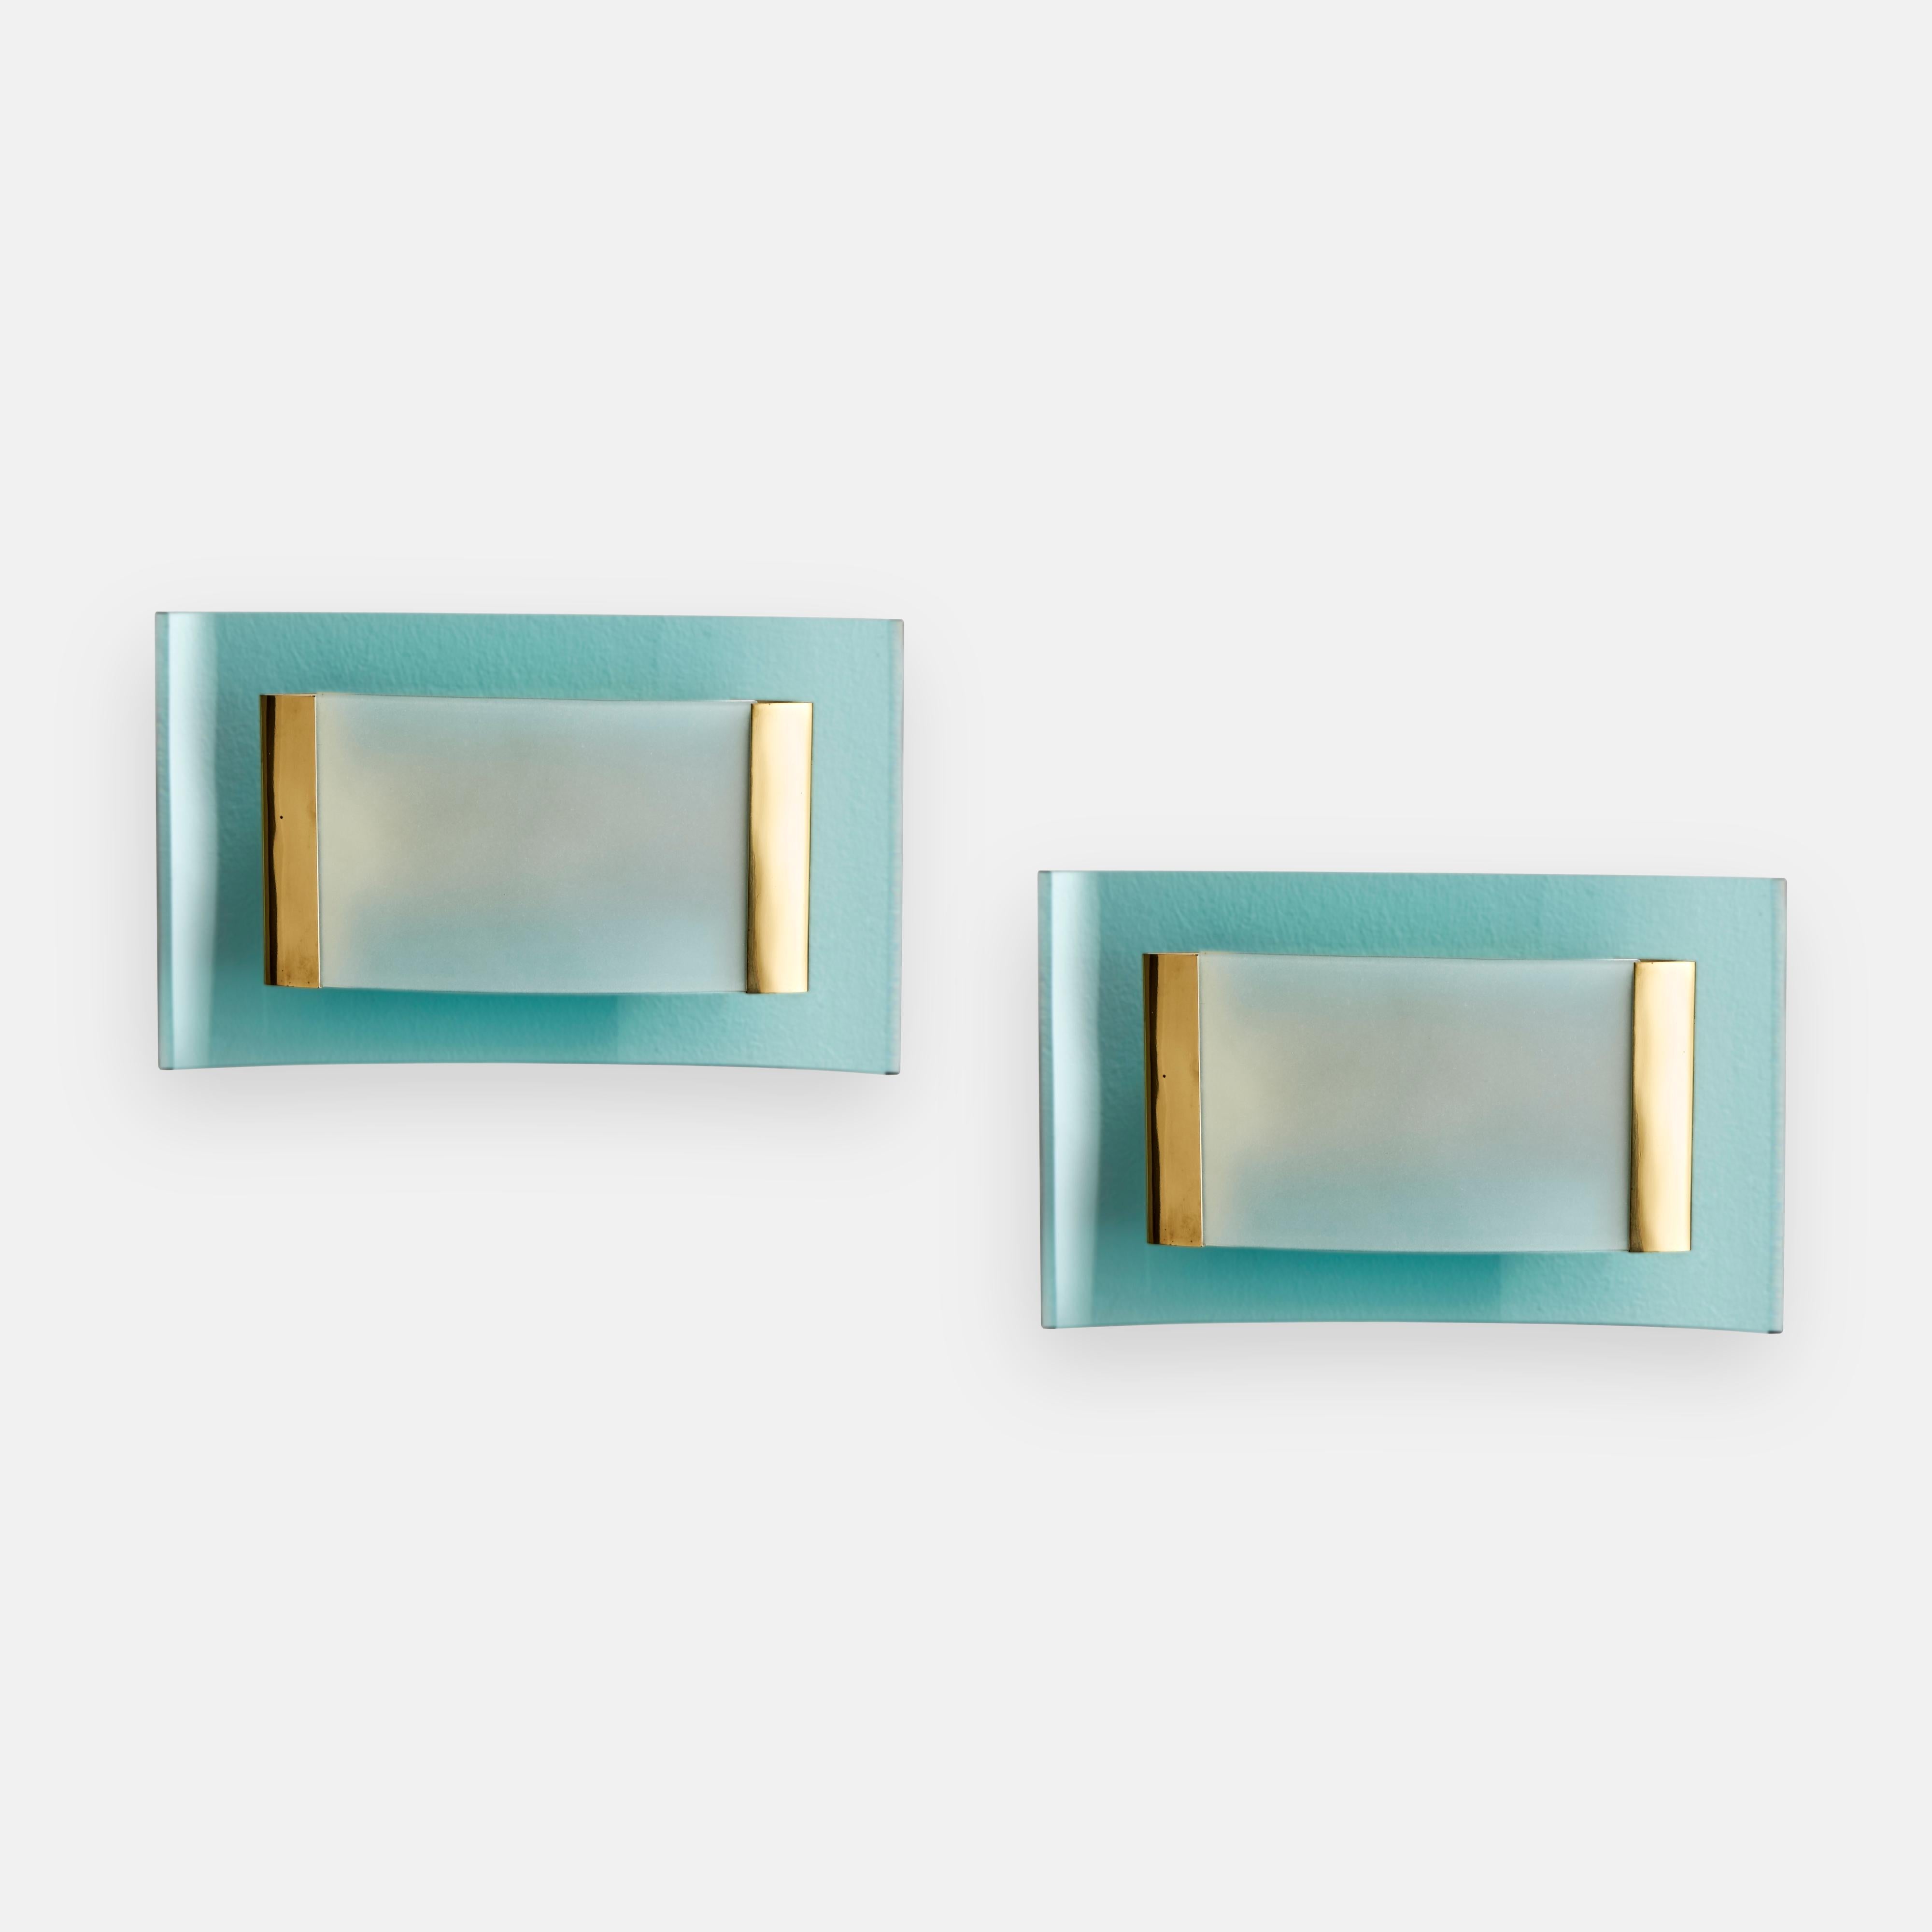 Max Ingrand for Fontana Arte rare and exquisite pair of modernist sconces or wall lights with light blue bent cut and bevelled glass and smaller central bent frosted glass held by brass fittings. 

Literature:
Illuminazione Arredamento Cristalli